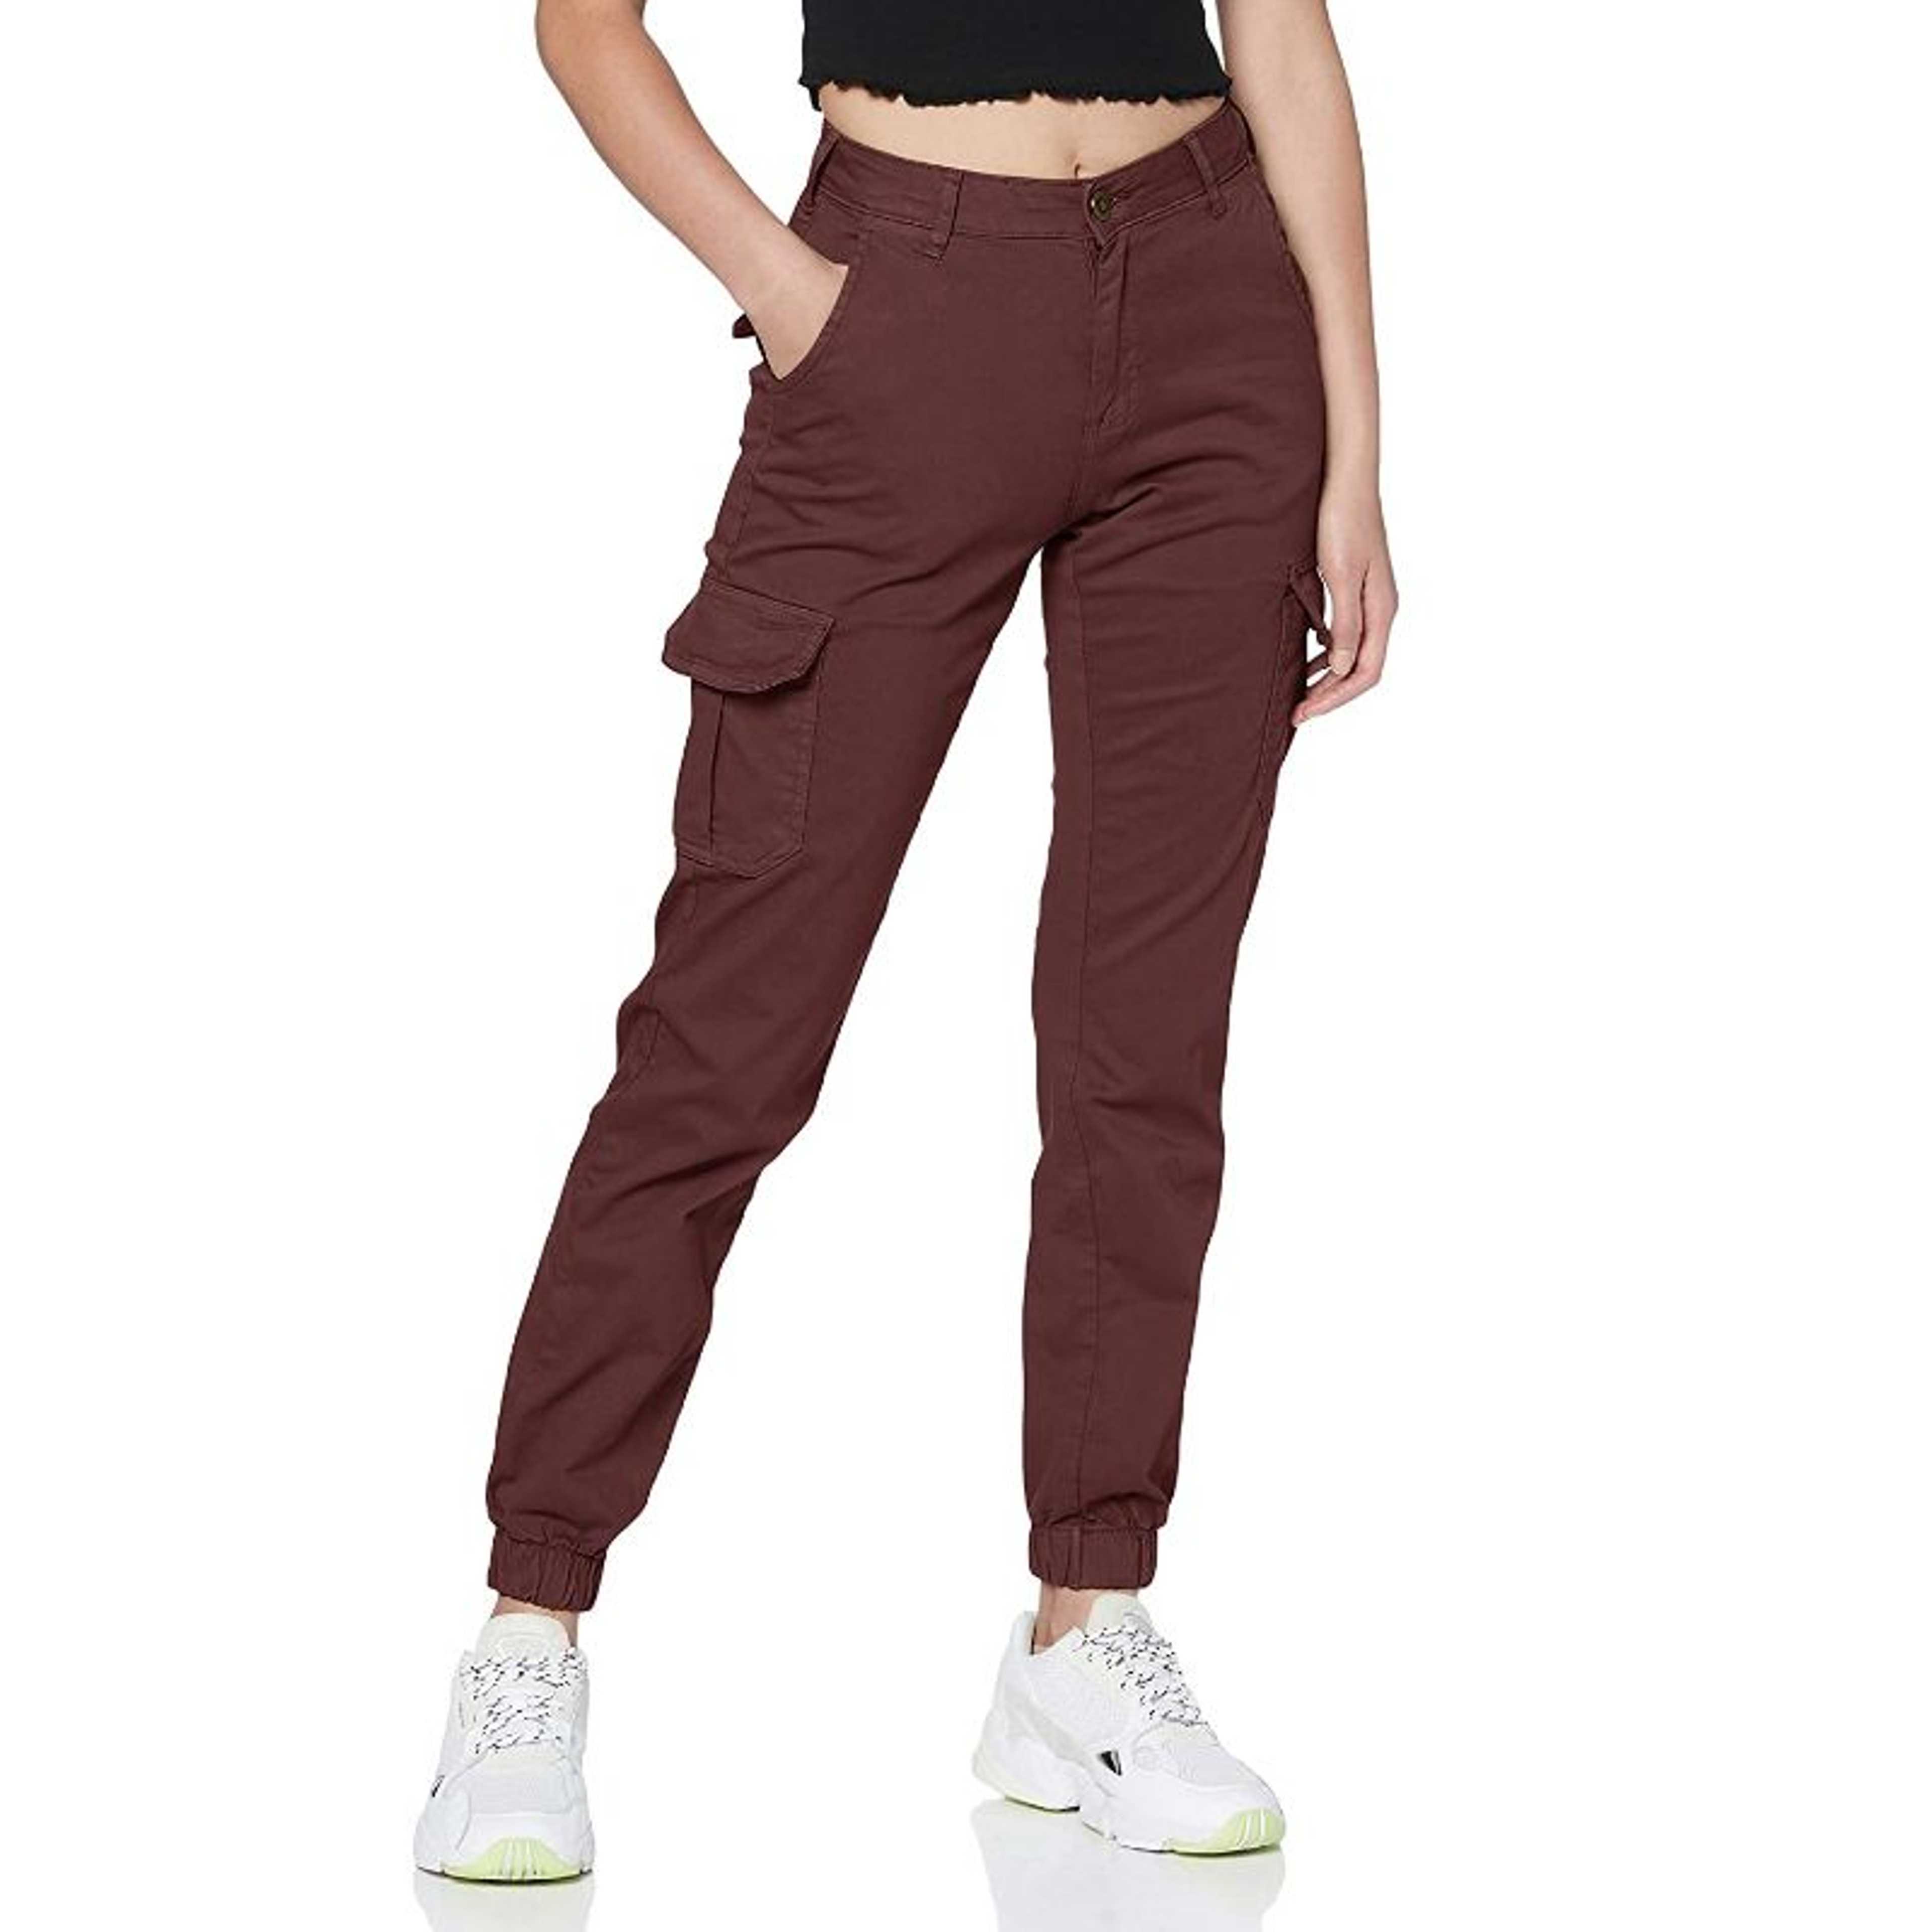 Maroon Color Rubahas Womens Cargo Trousers Ladies Trousers Jeans Pants